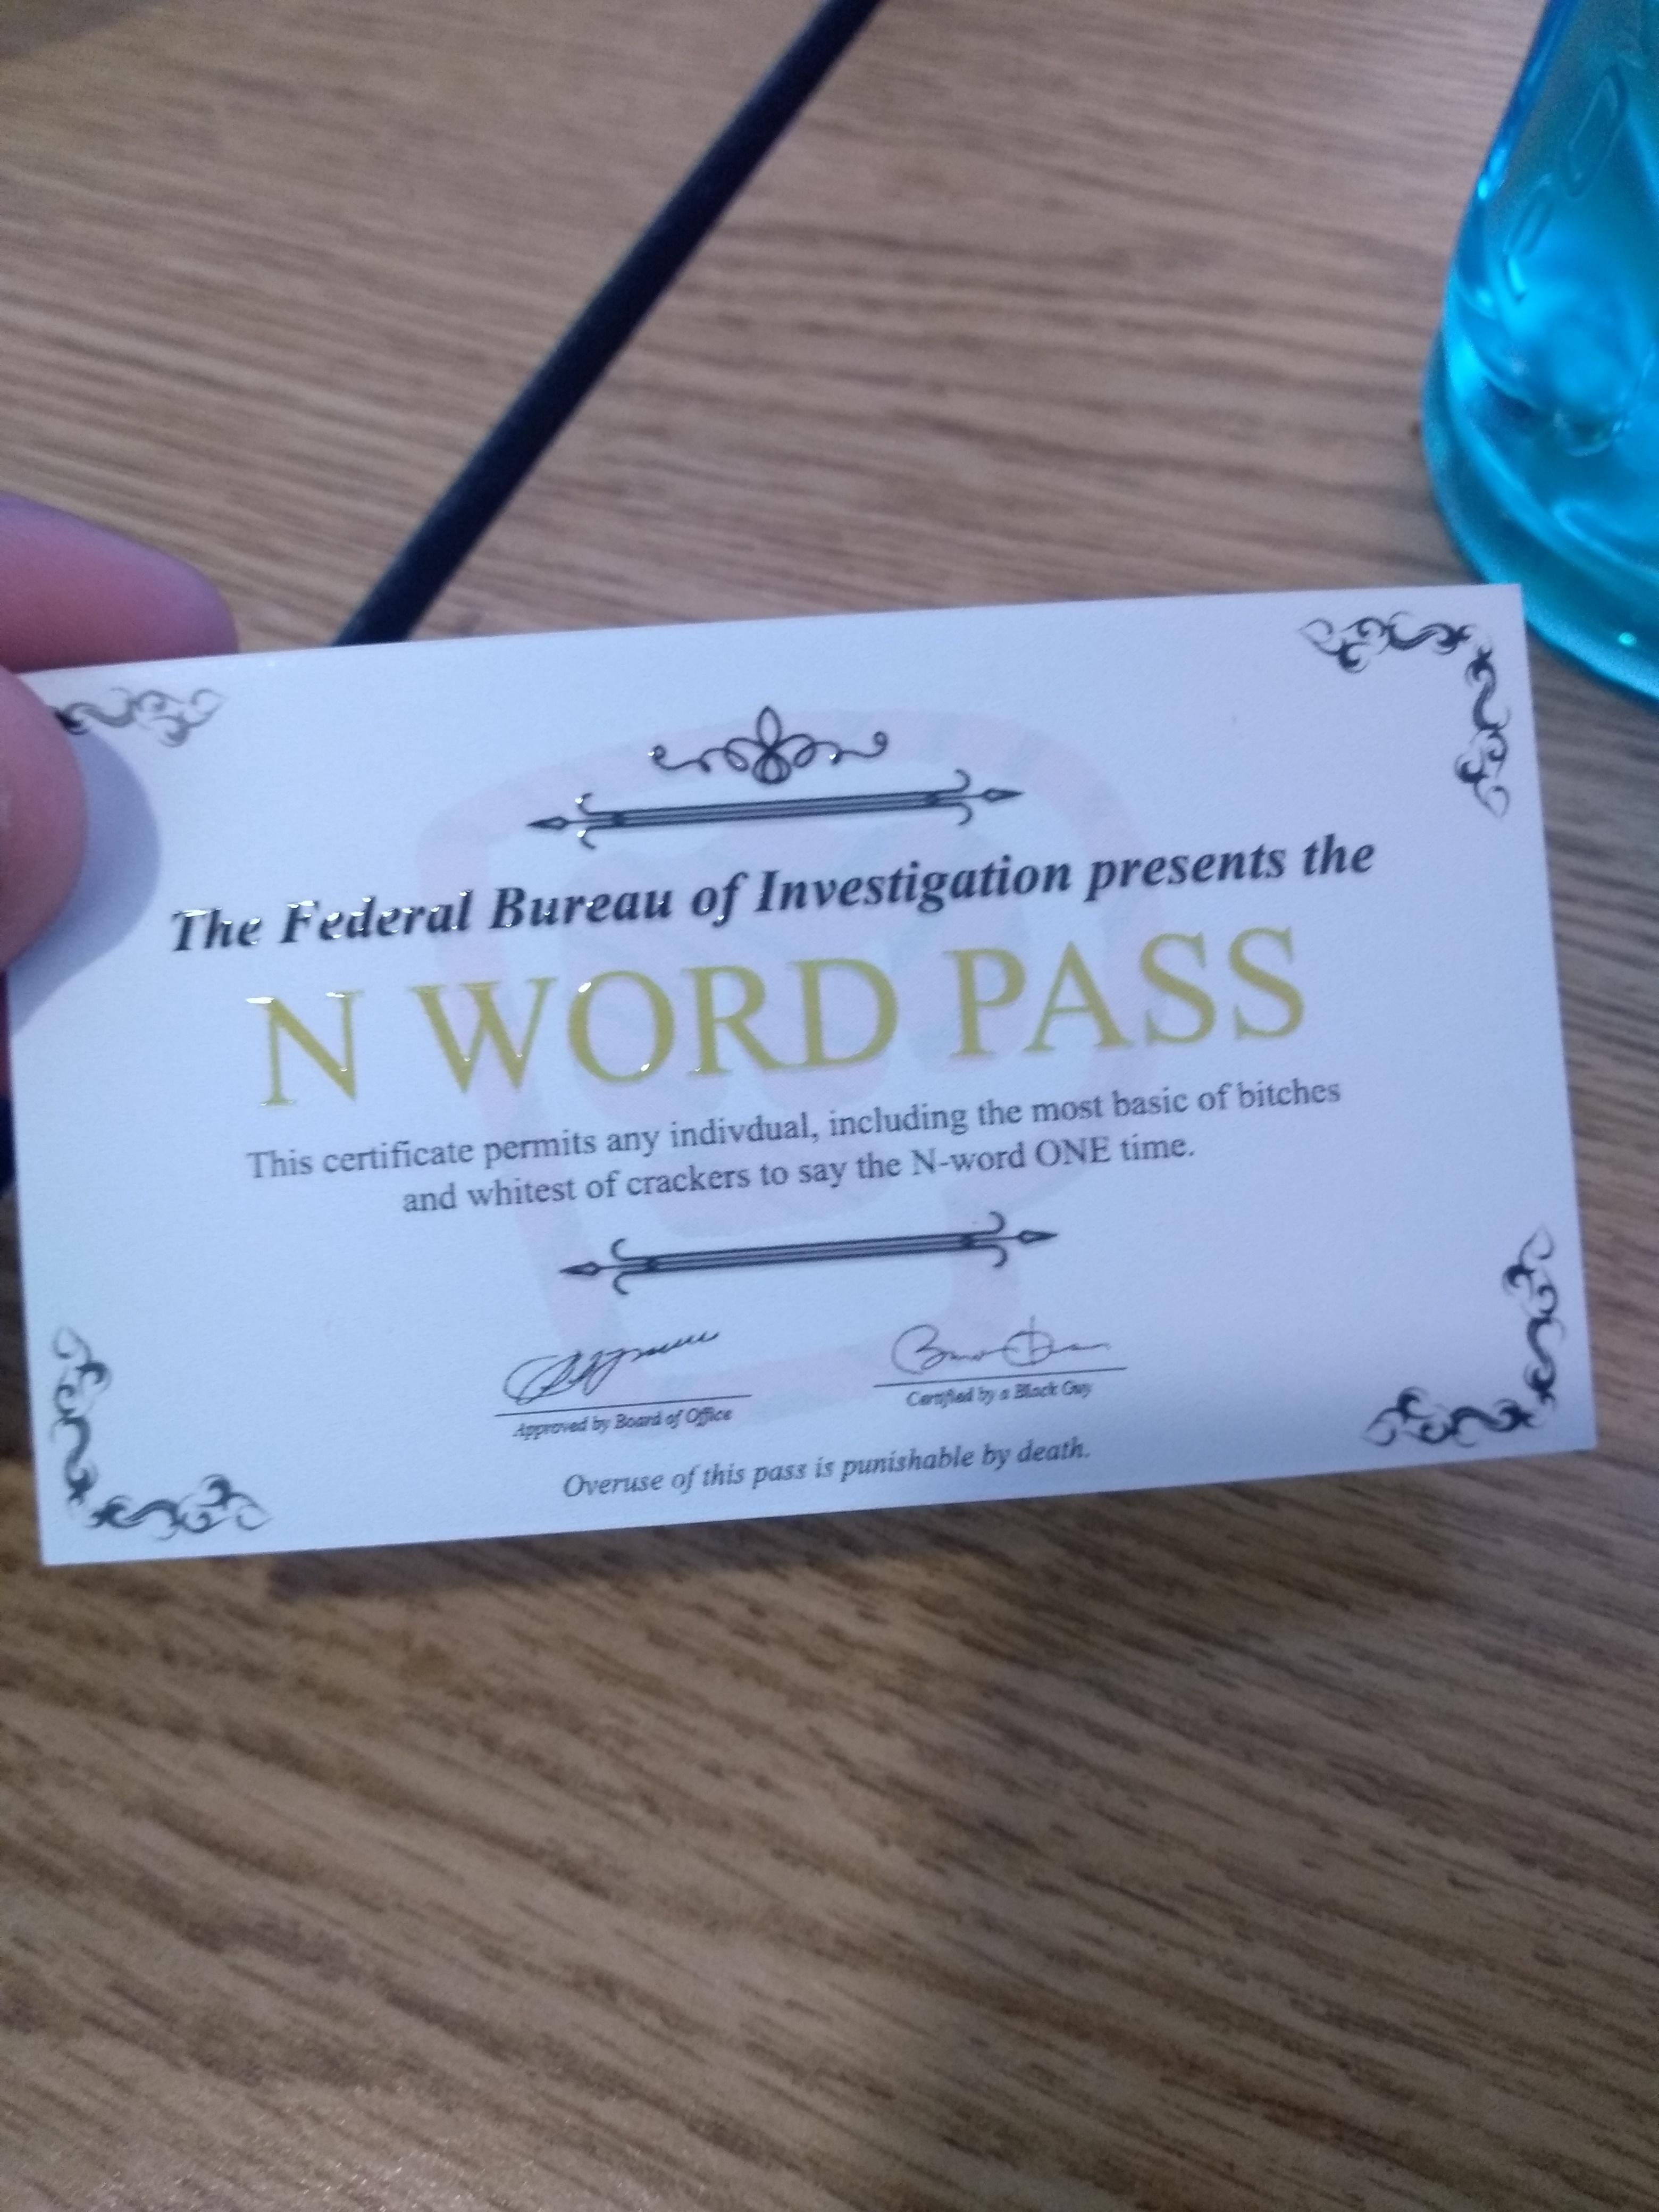 A guy at our high school got suspended for passing out these passes. It was on the local news too.